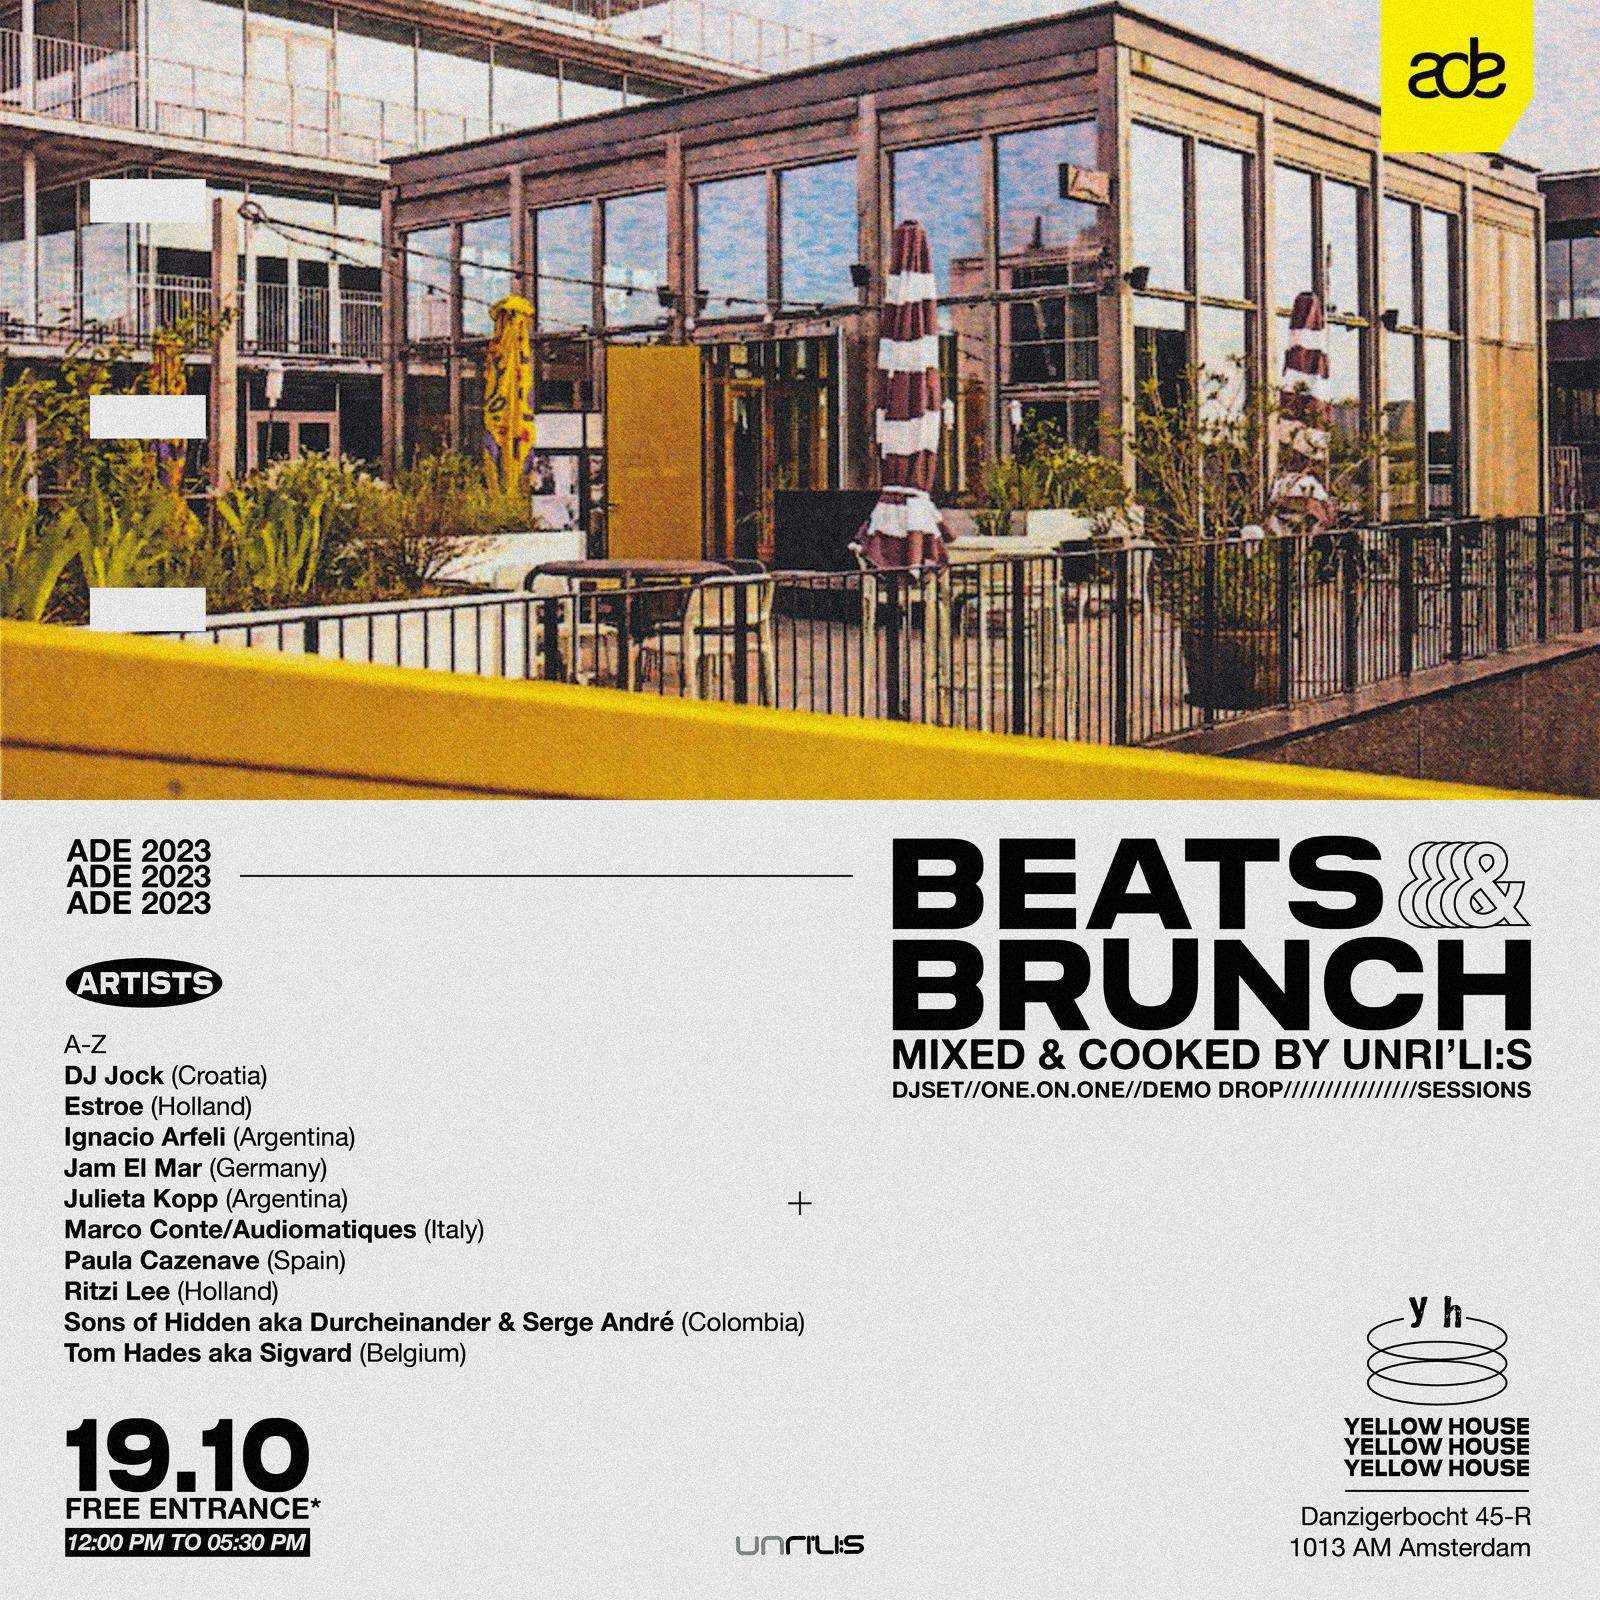 ADE 2023 Beats & Brunch: Mixed & Cooked by Unrilis - フライヤー表